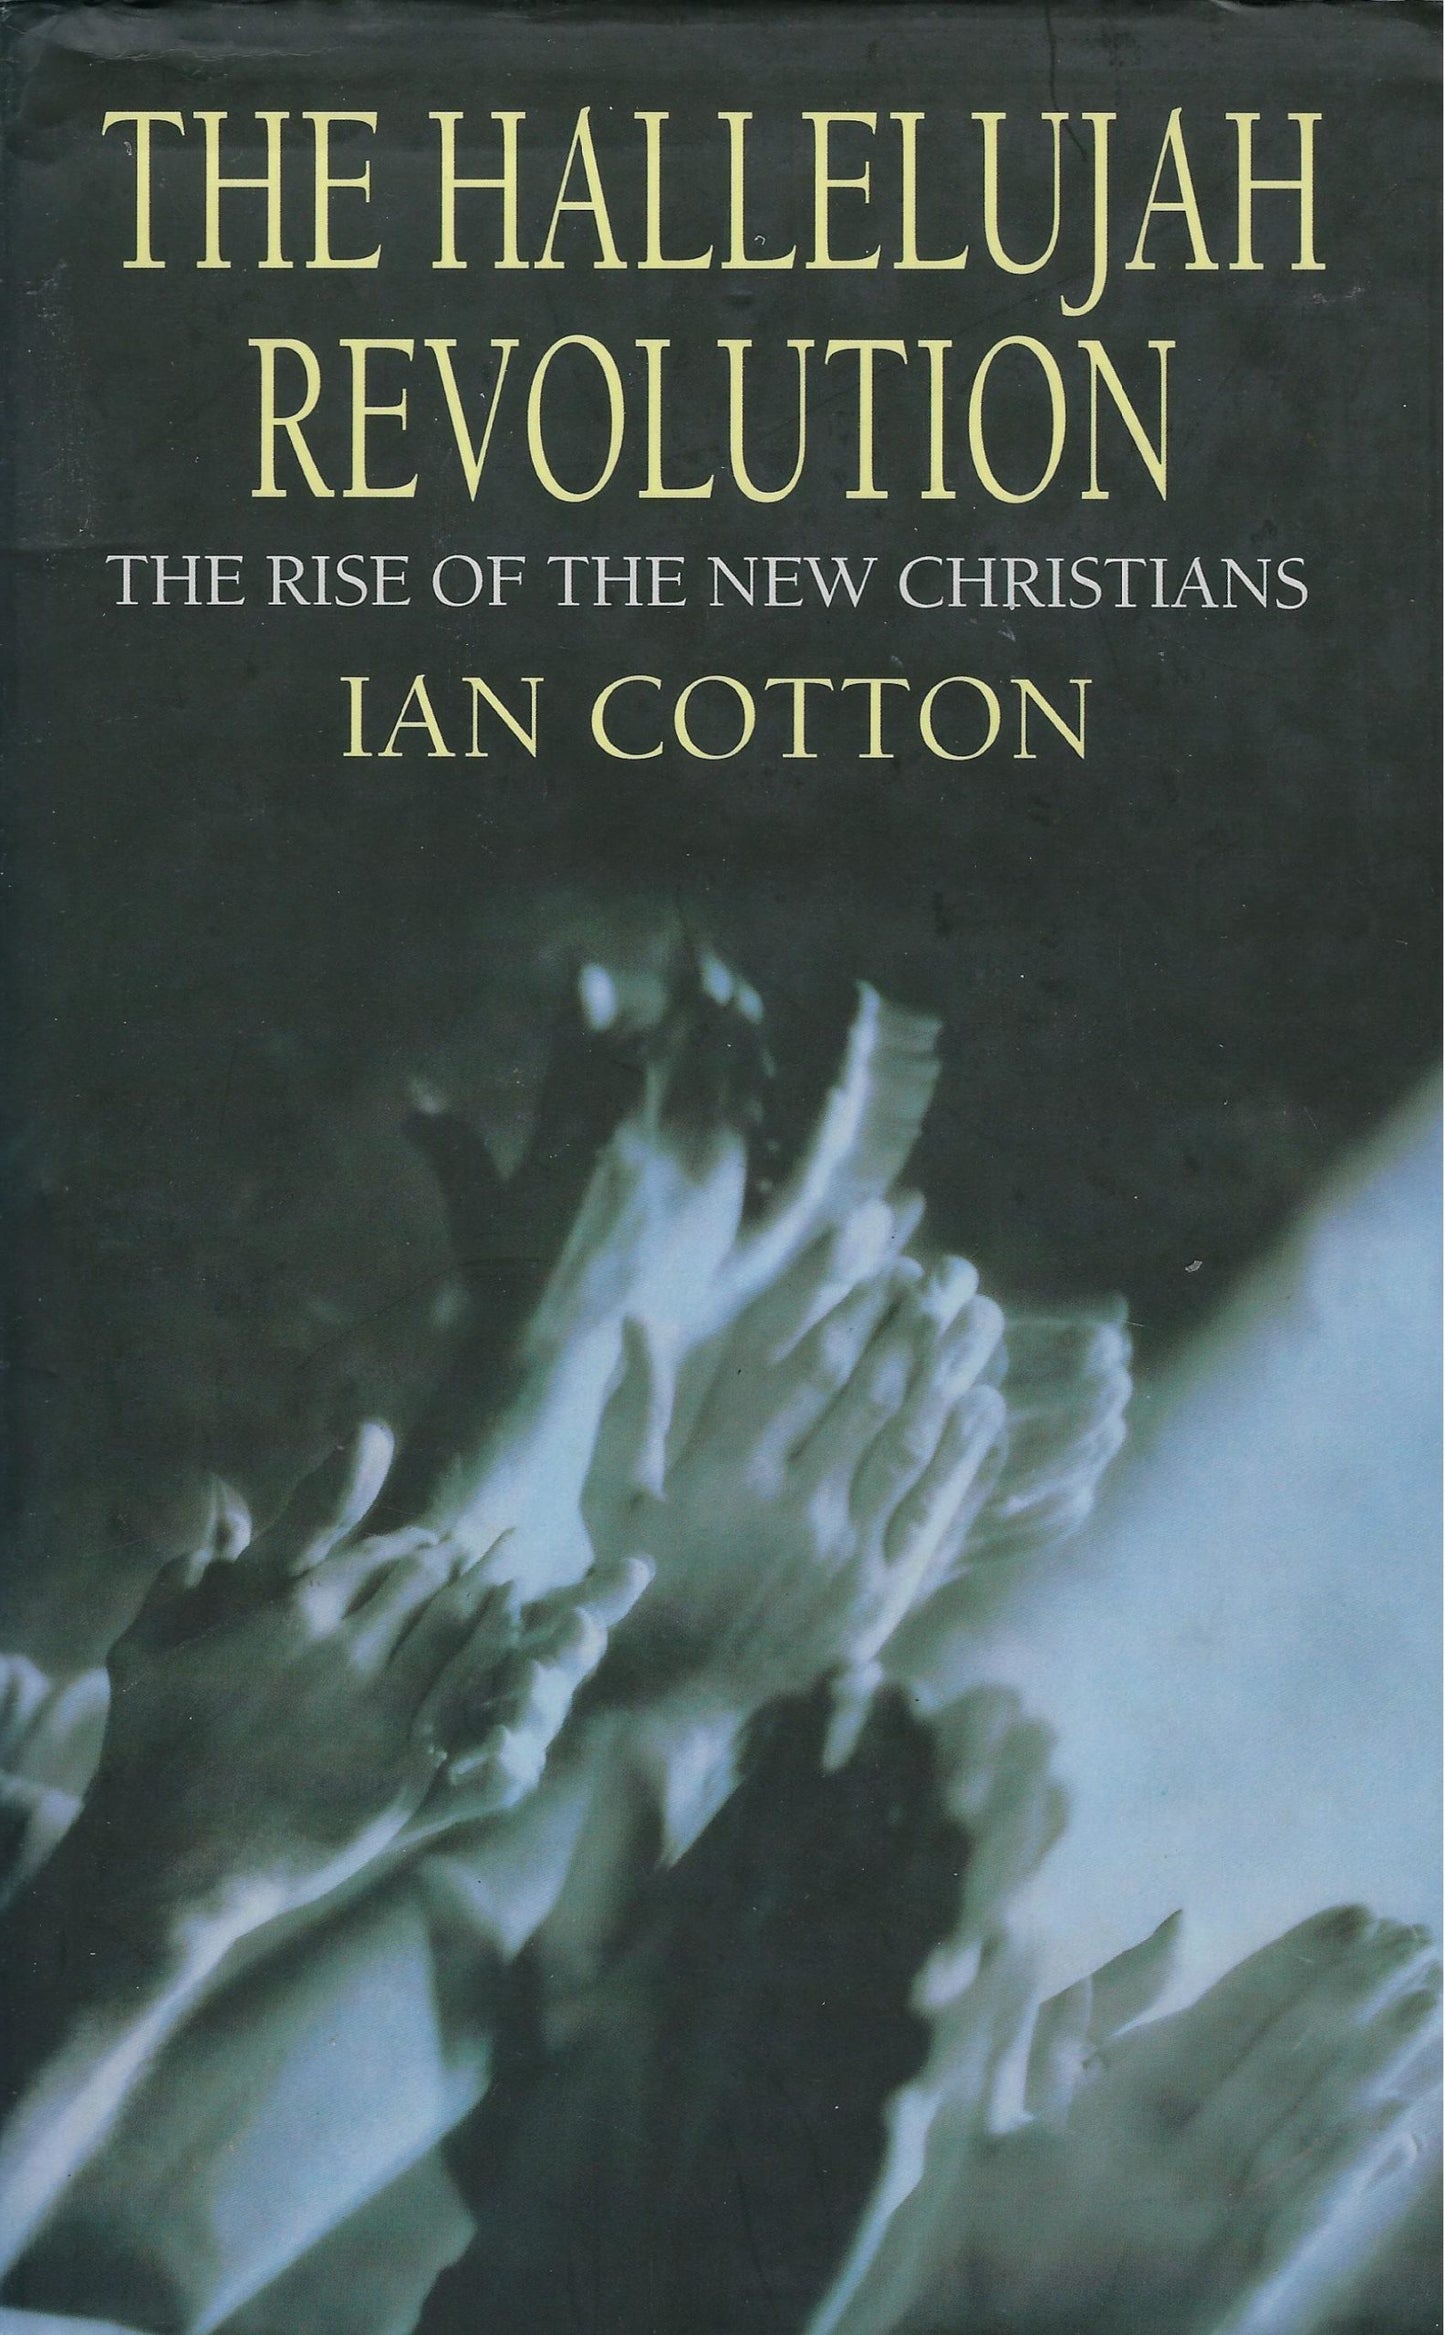 The Hallelujah Revolution, the rise of the new Christians